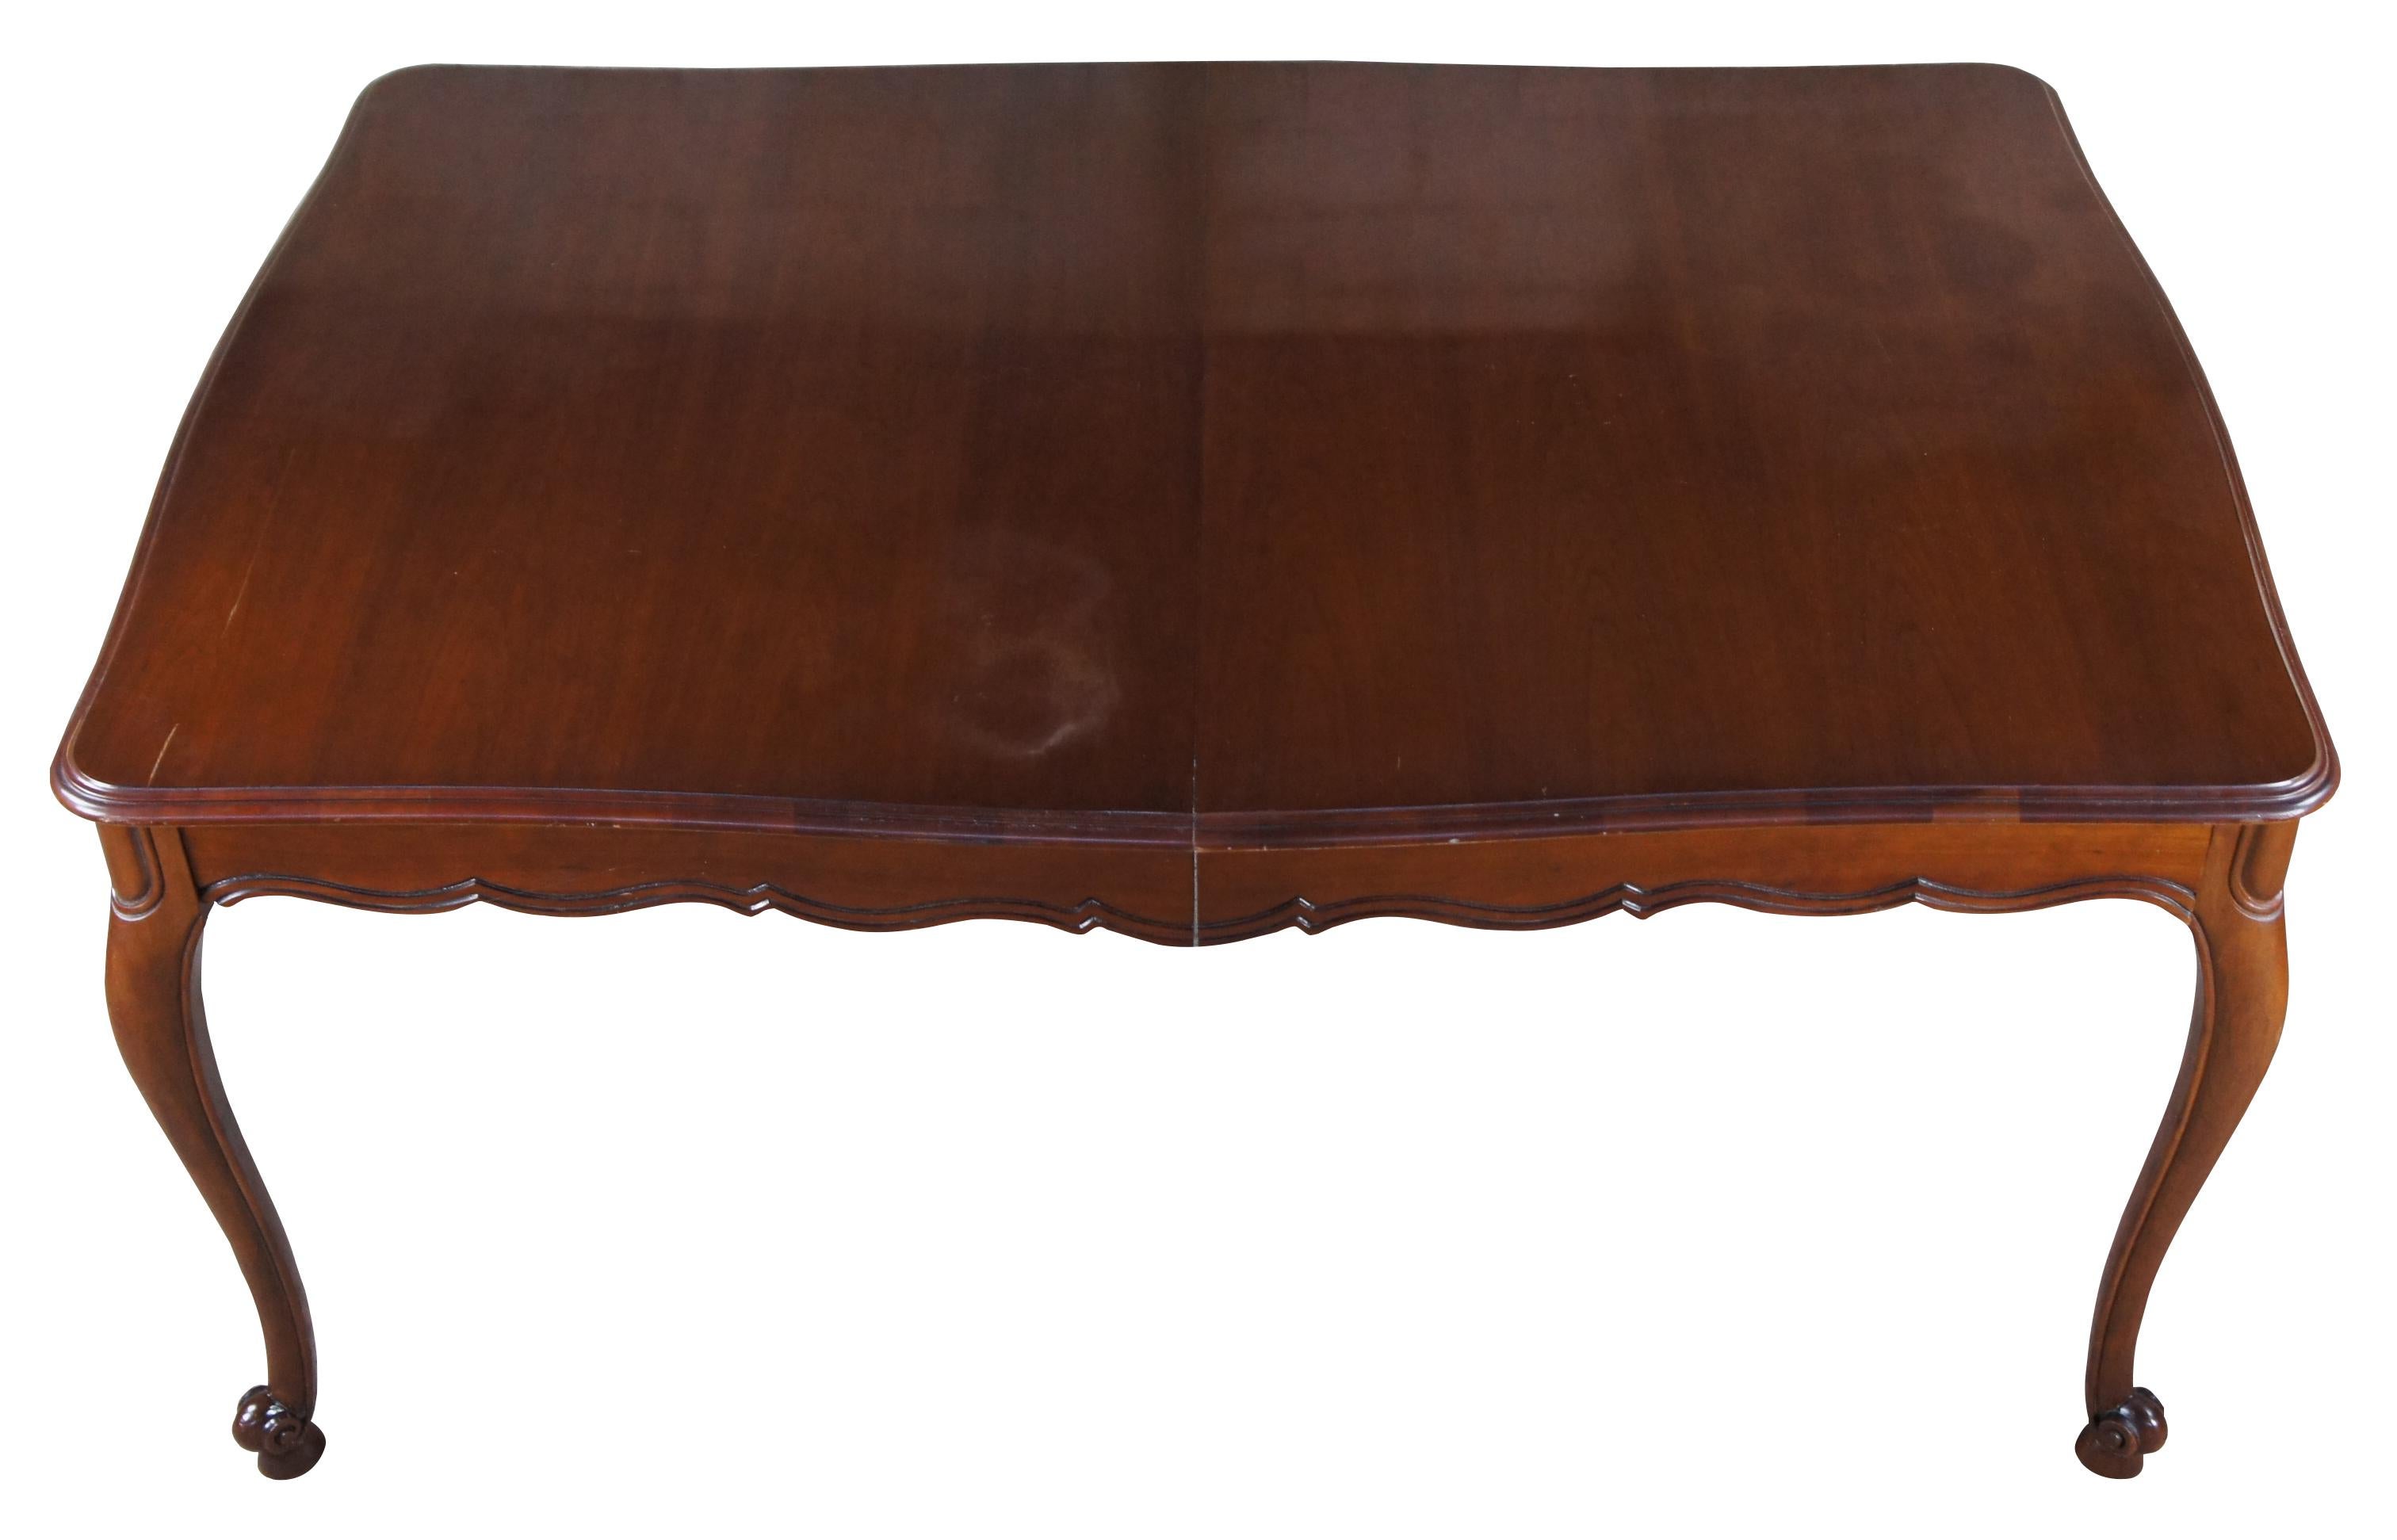 Vintage Drexel Heritage French Provincial dining table. Made of cherry featuring scalloped rectangular form with fluted accents, cabriole legs and three extending leaves (12